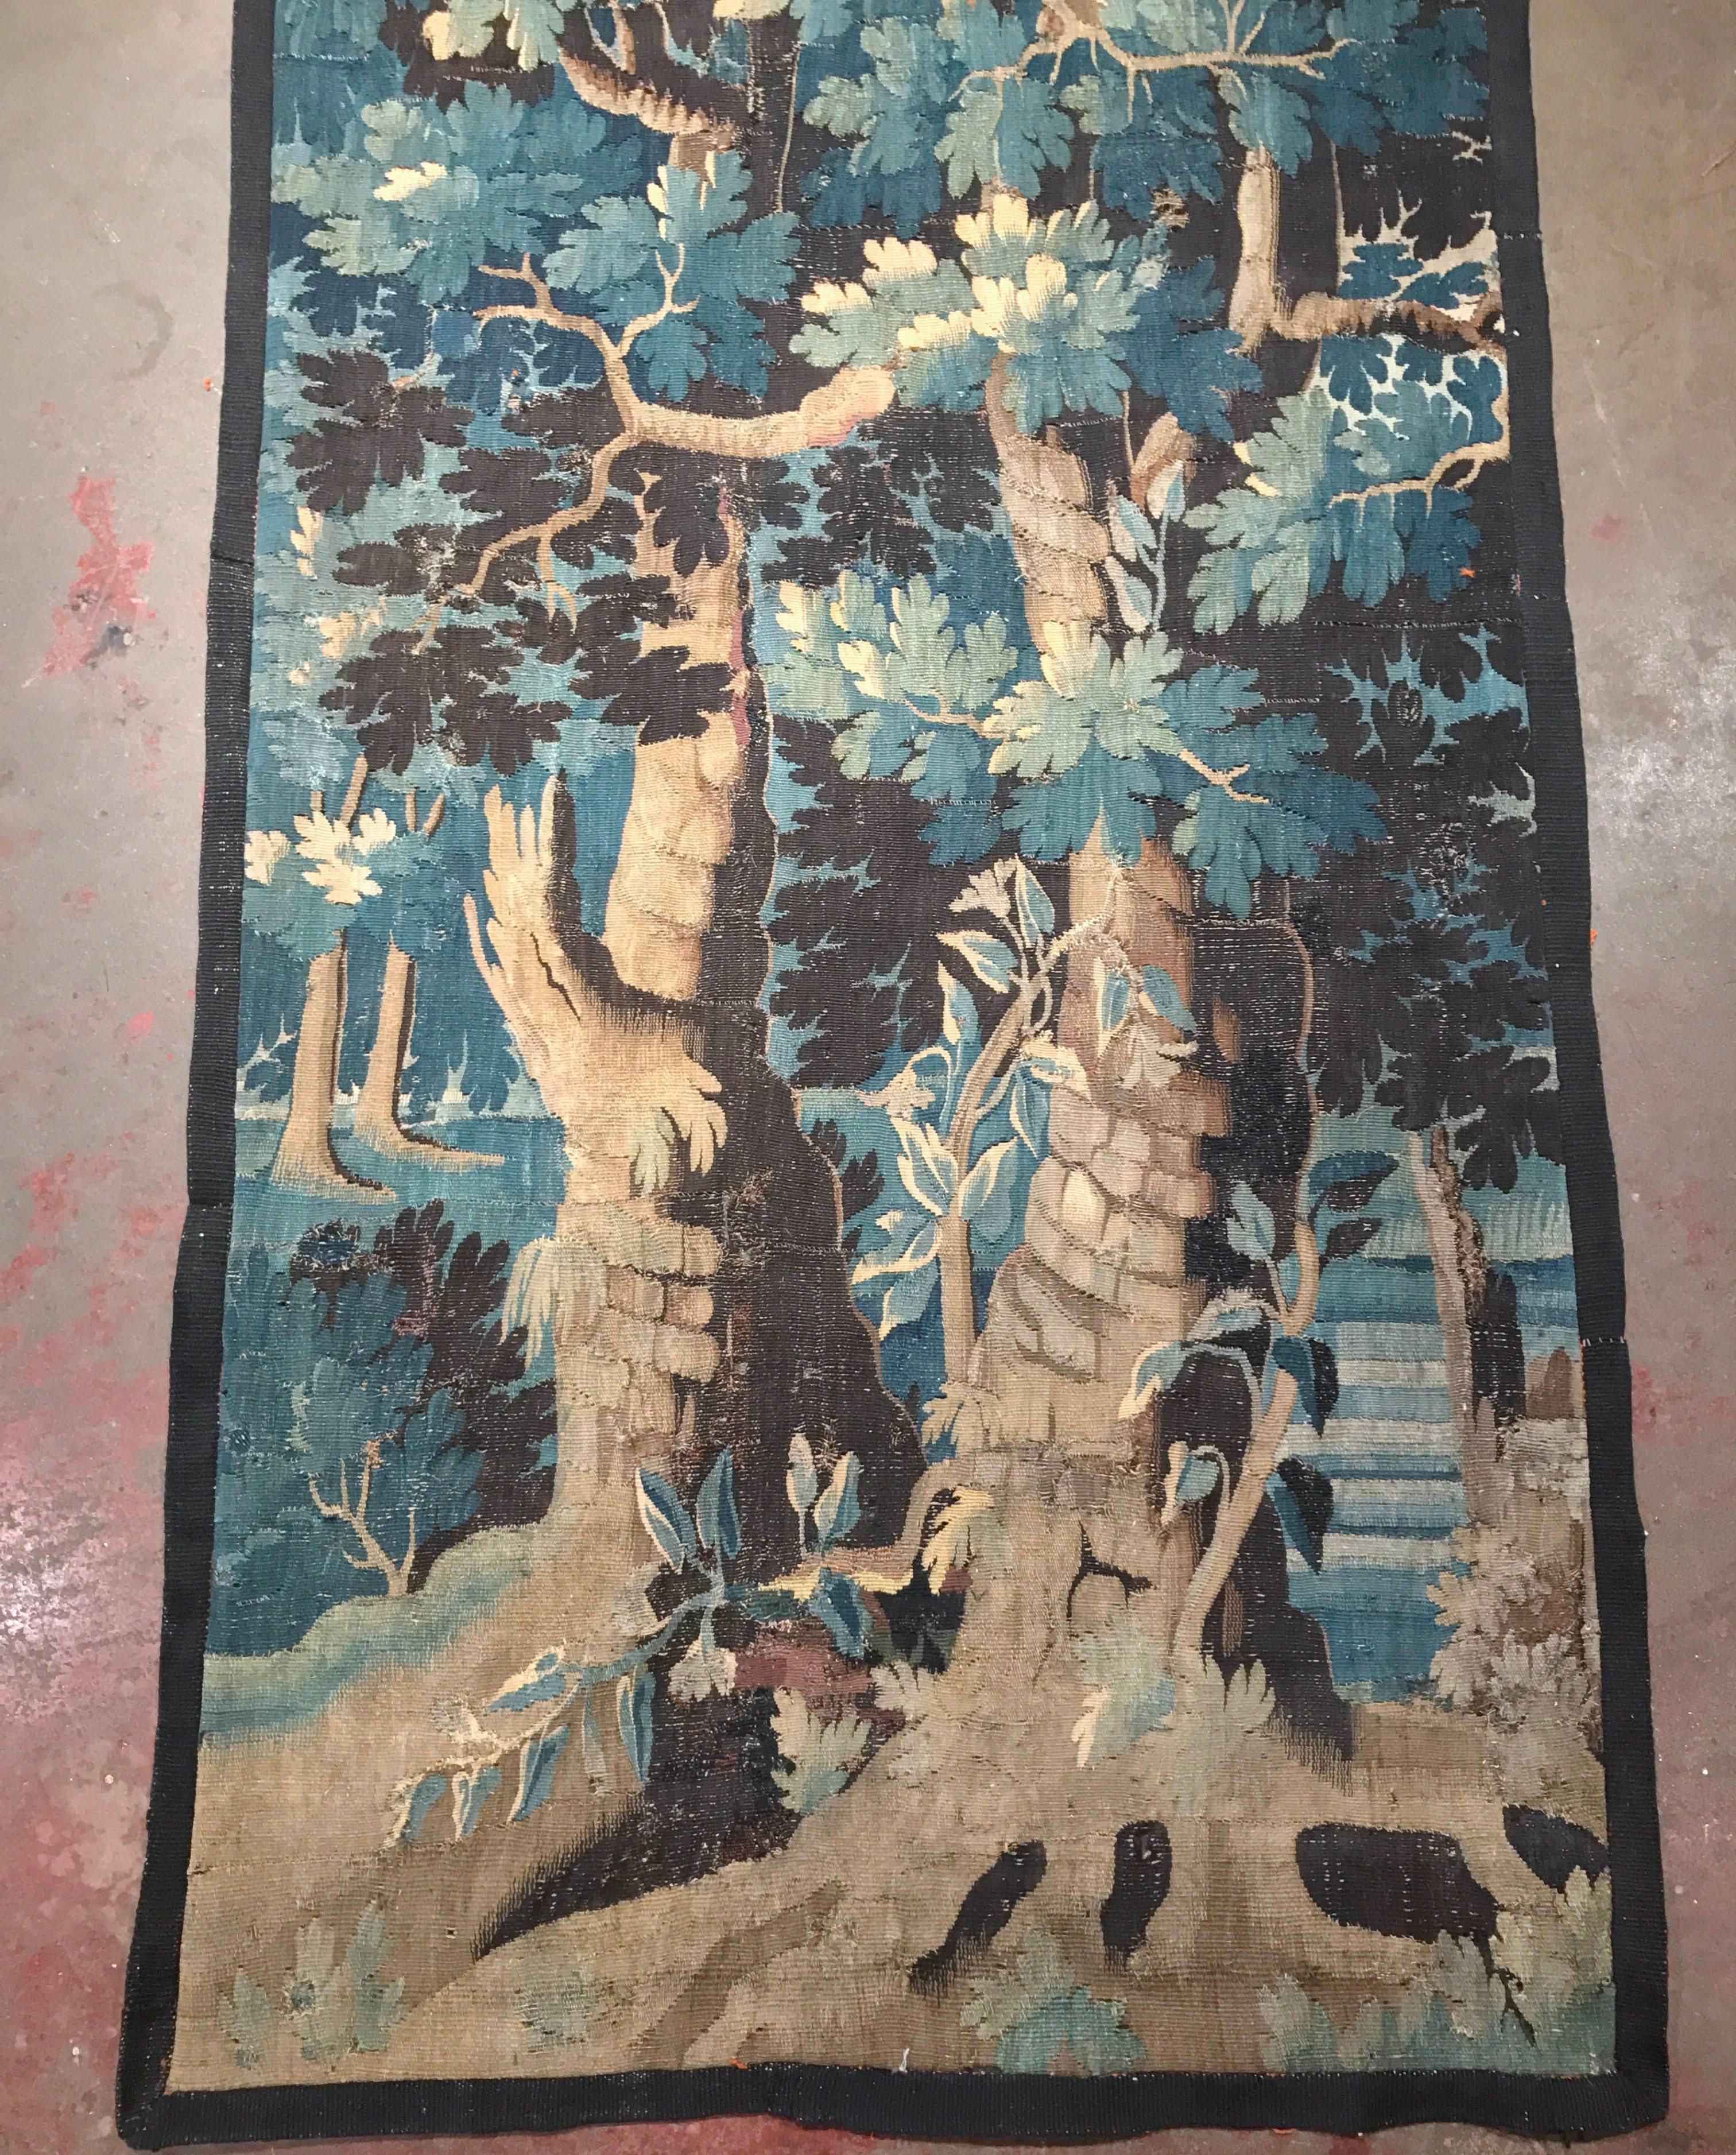 This long, narrow tapestry was woven in Aubusson, France, circa 1750. The colorful, antique, verdure wall hanging features two trees with leaves in a lush, verdant, blue, green and beige palette. The piece is in good condition with wear commensurate